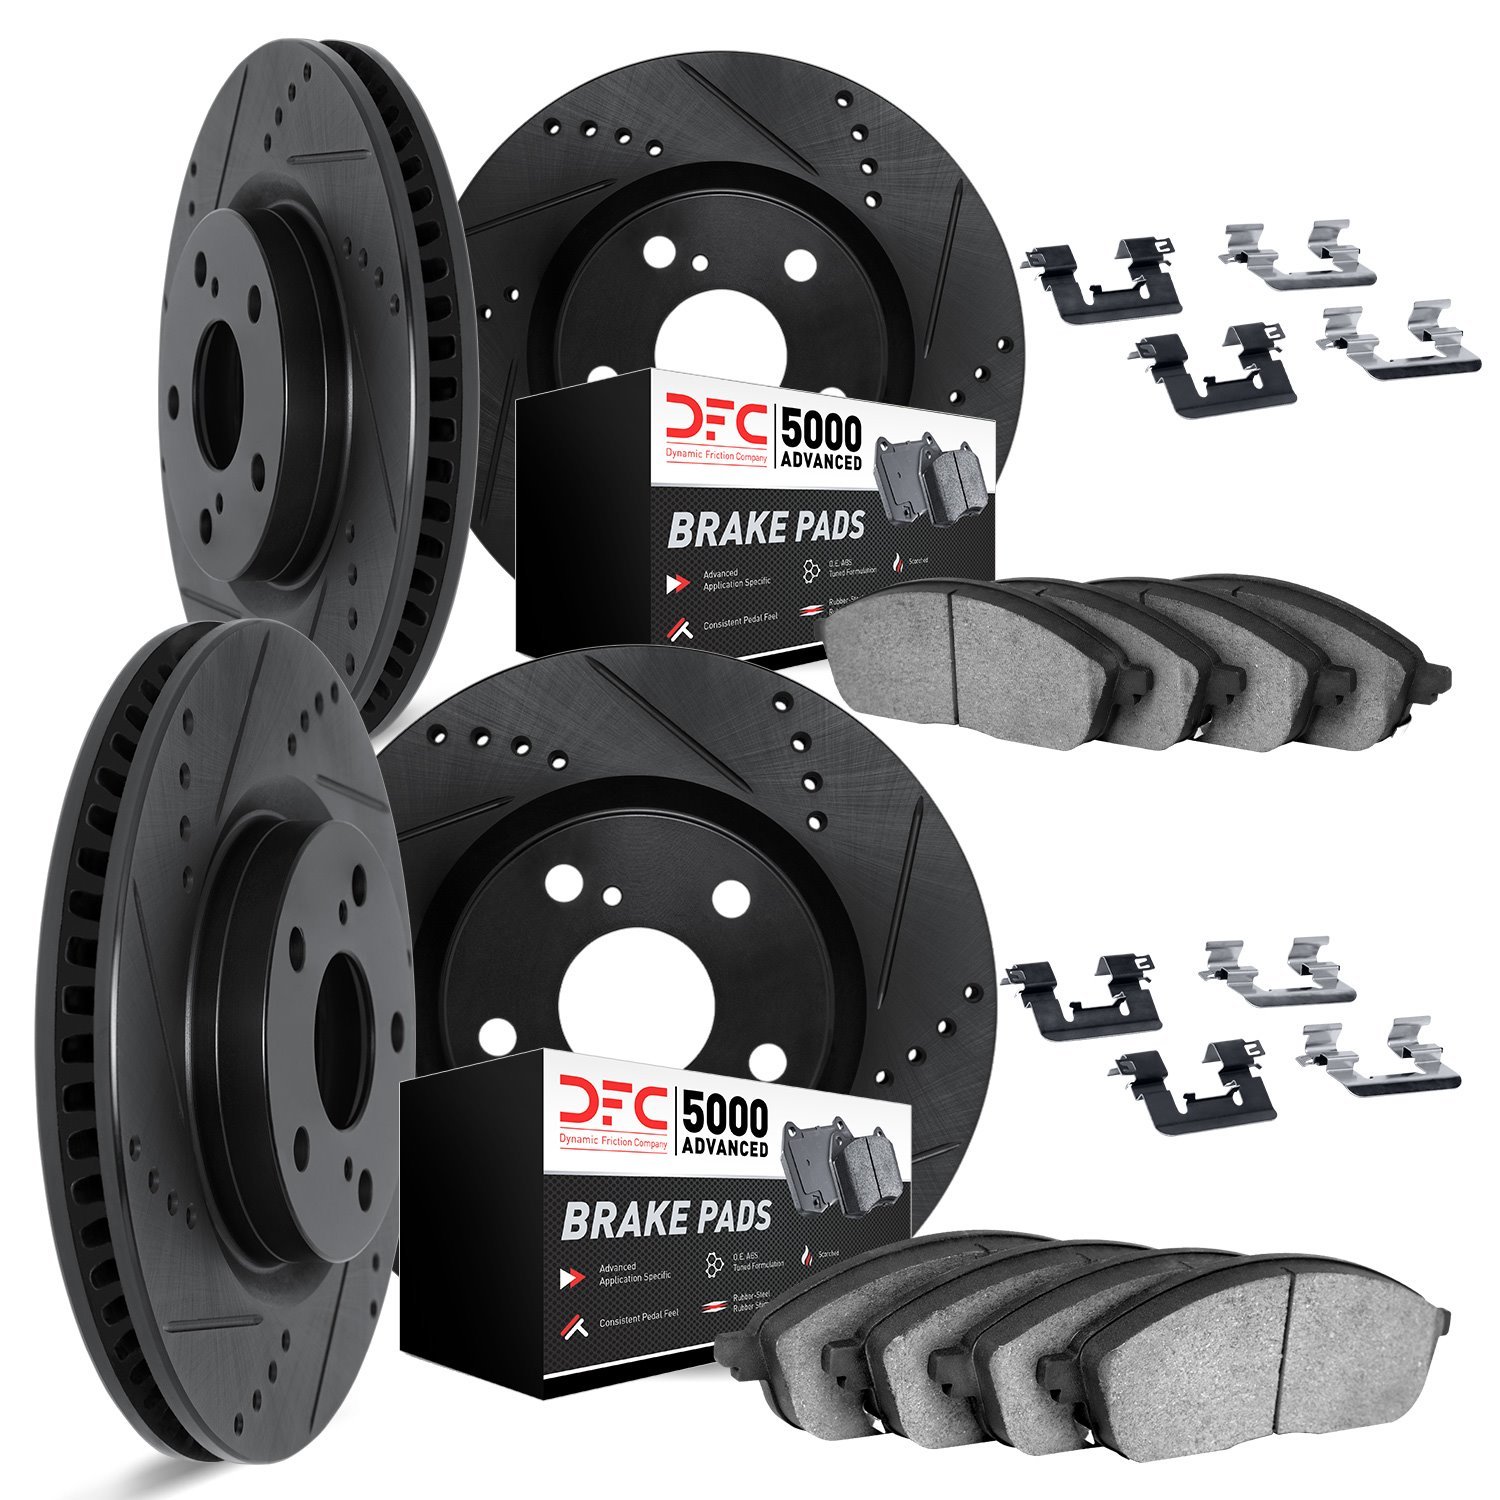 8514-31042 Drilled/Slotted Brake Rotors w/5000 Advanced Brake Pads Kit & Hardware [Black], 2015-2015 BMW, Position: Front and Re